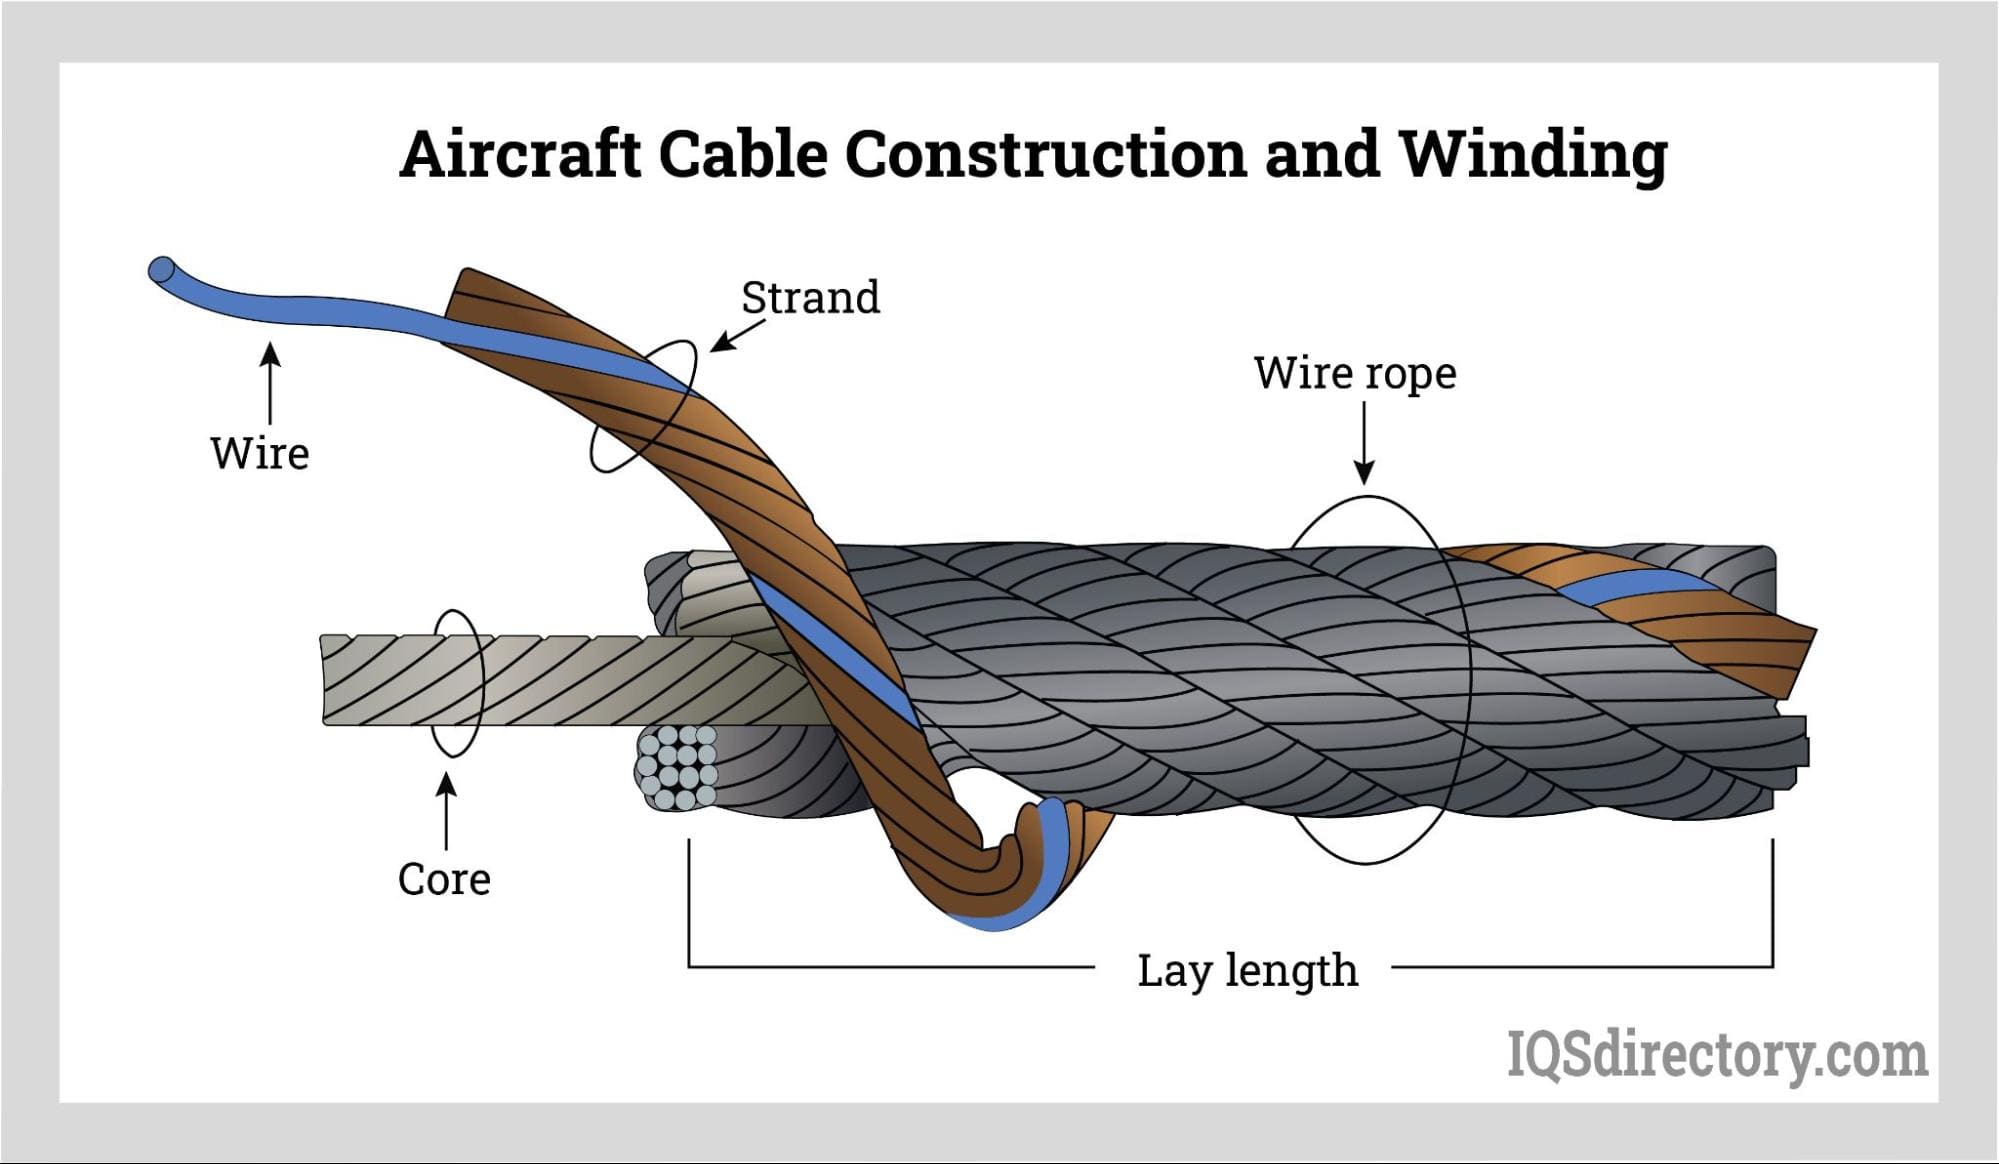 Aircraft Cable Construction and Winding